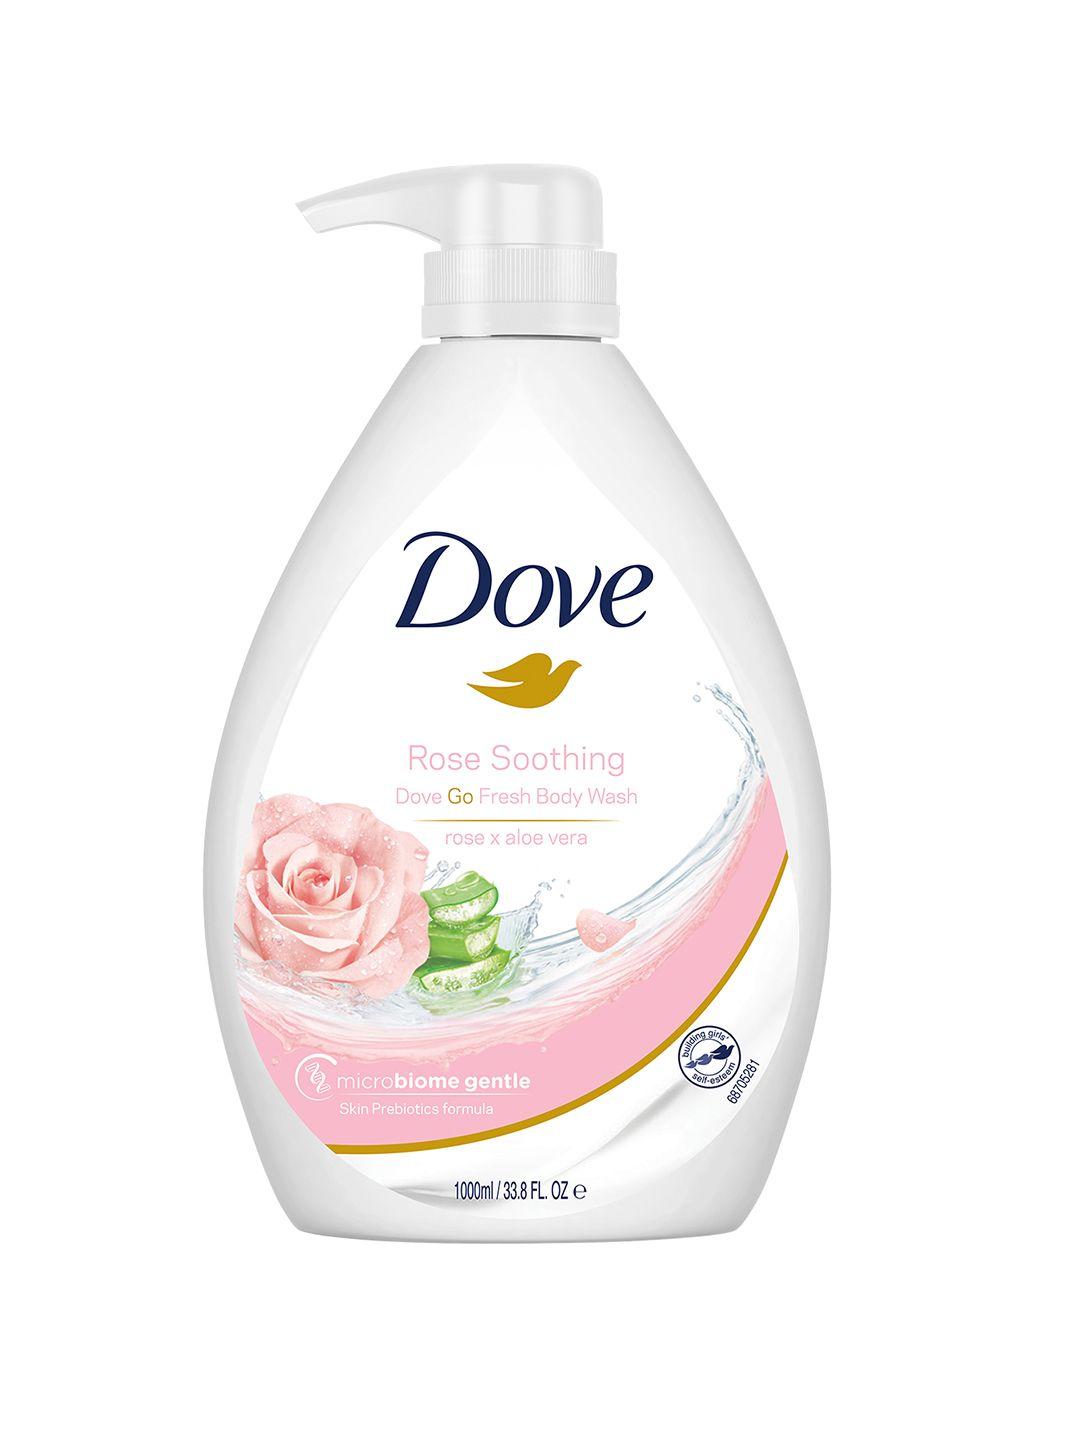 dove rose soothing go fresh microbiome gentle body wash with aloe vera - 1l